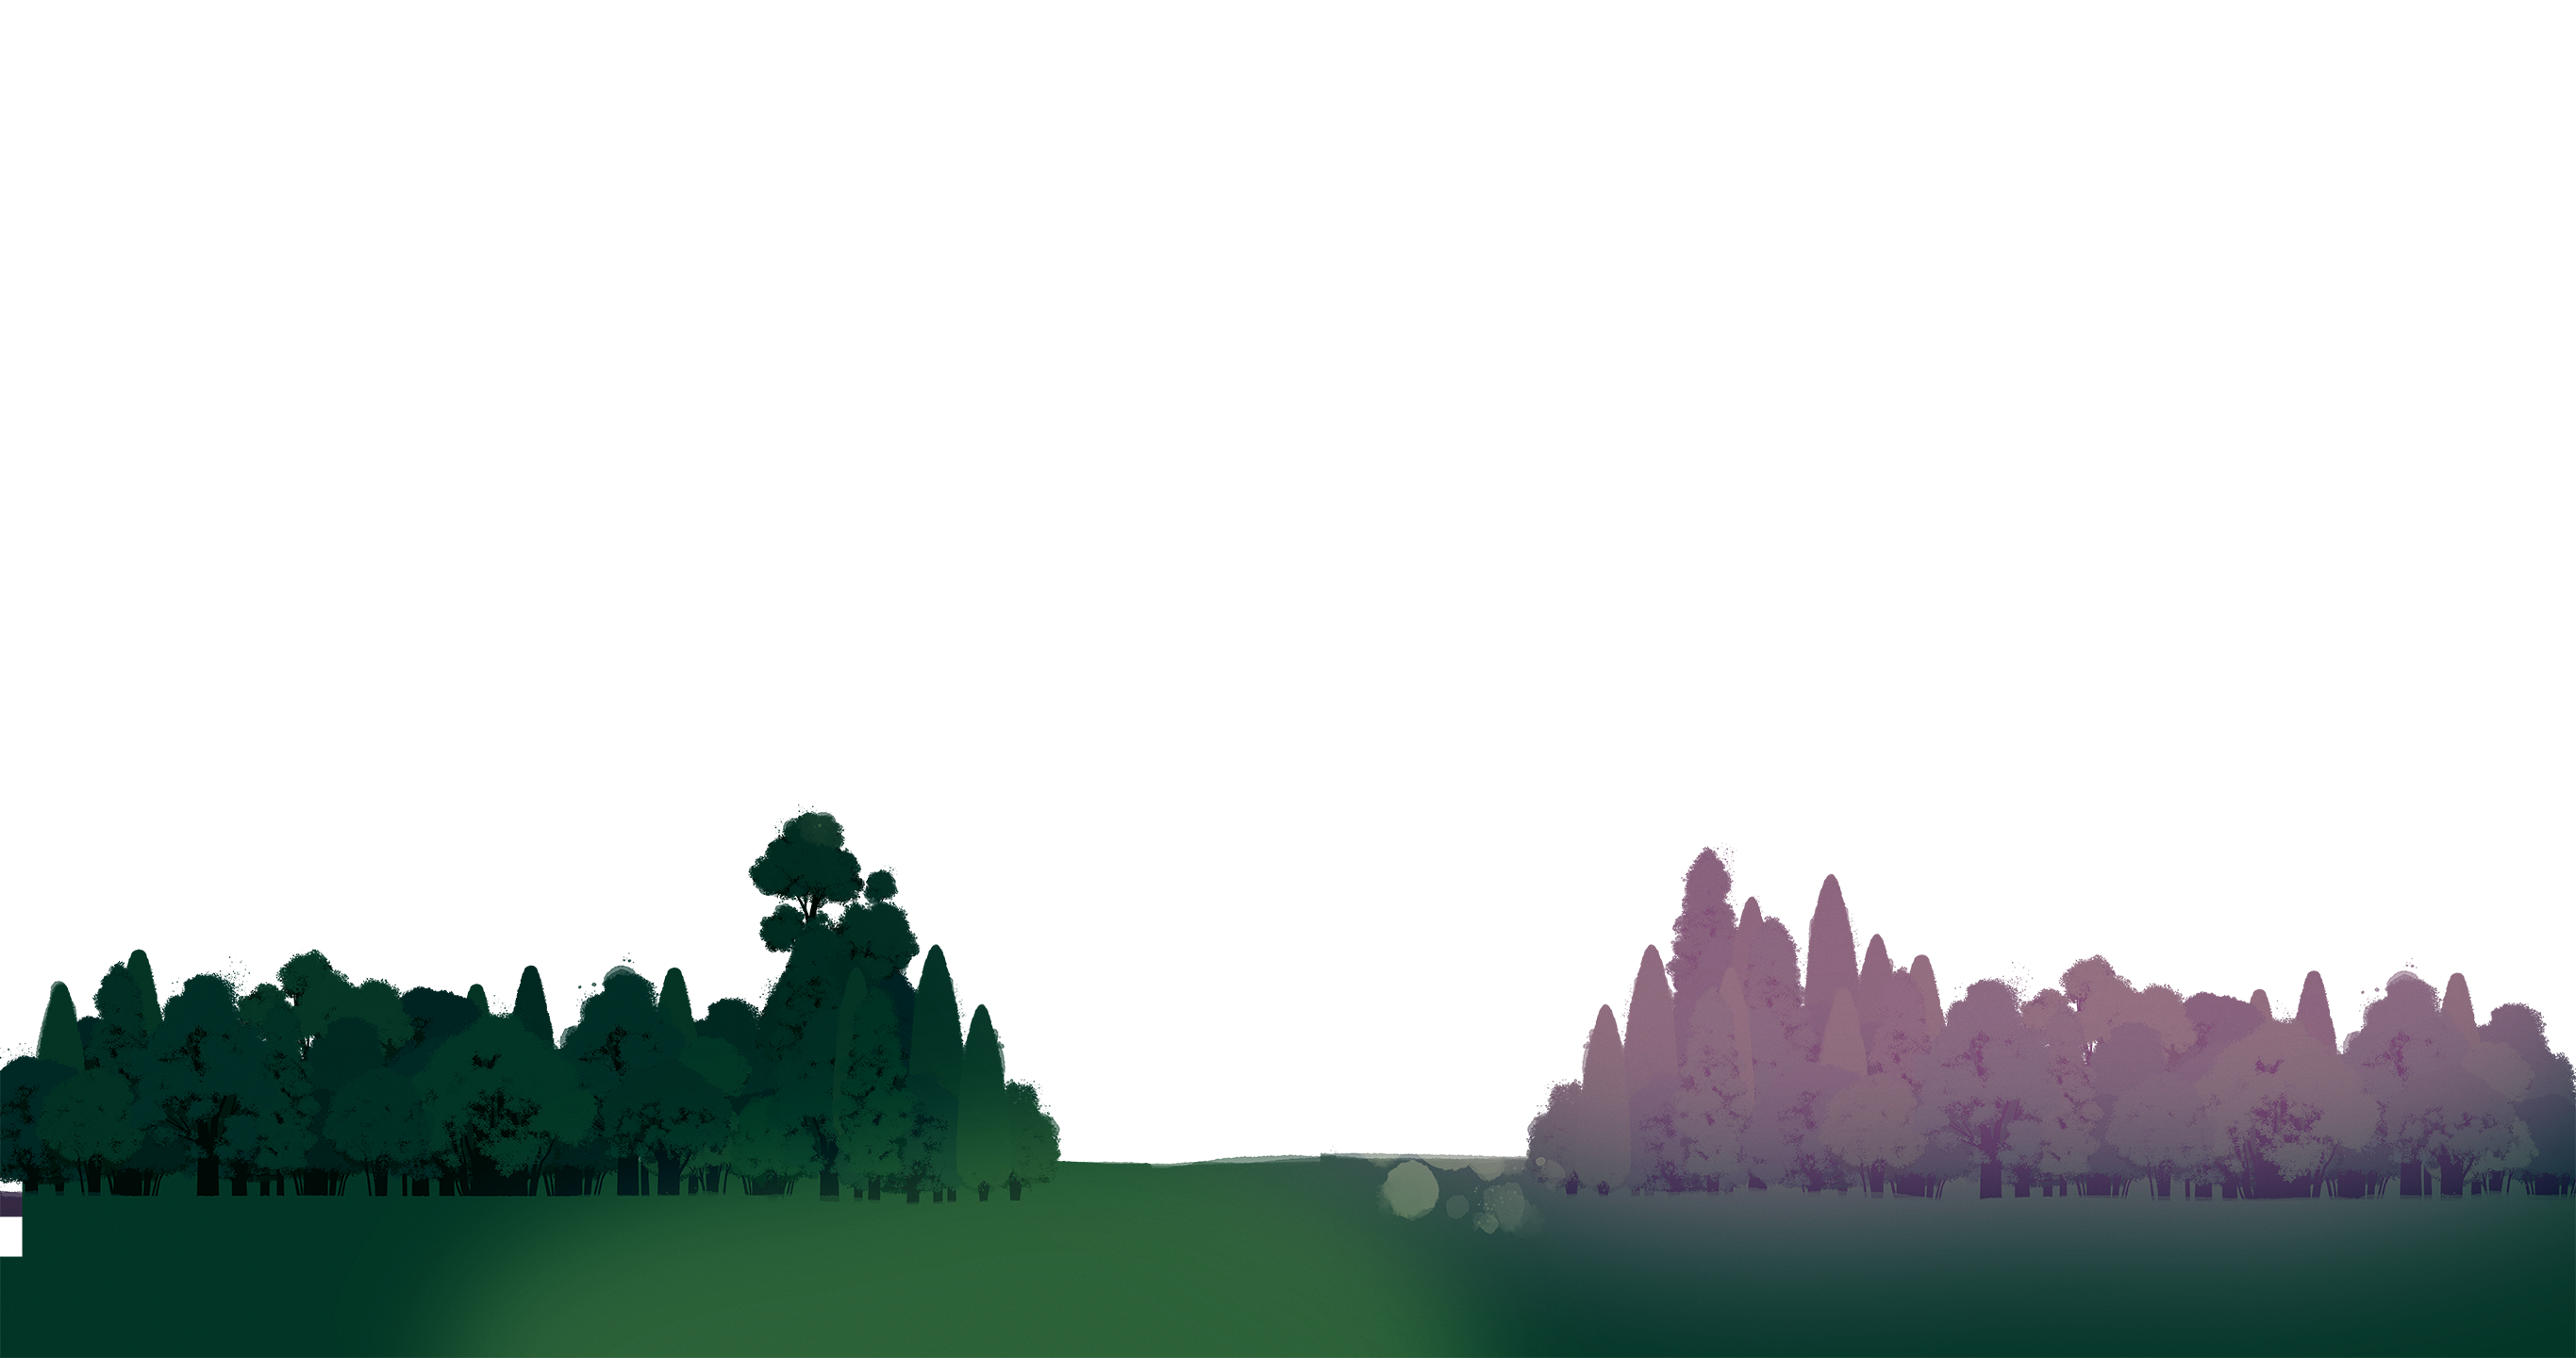 Background image displaying trees and the ground line